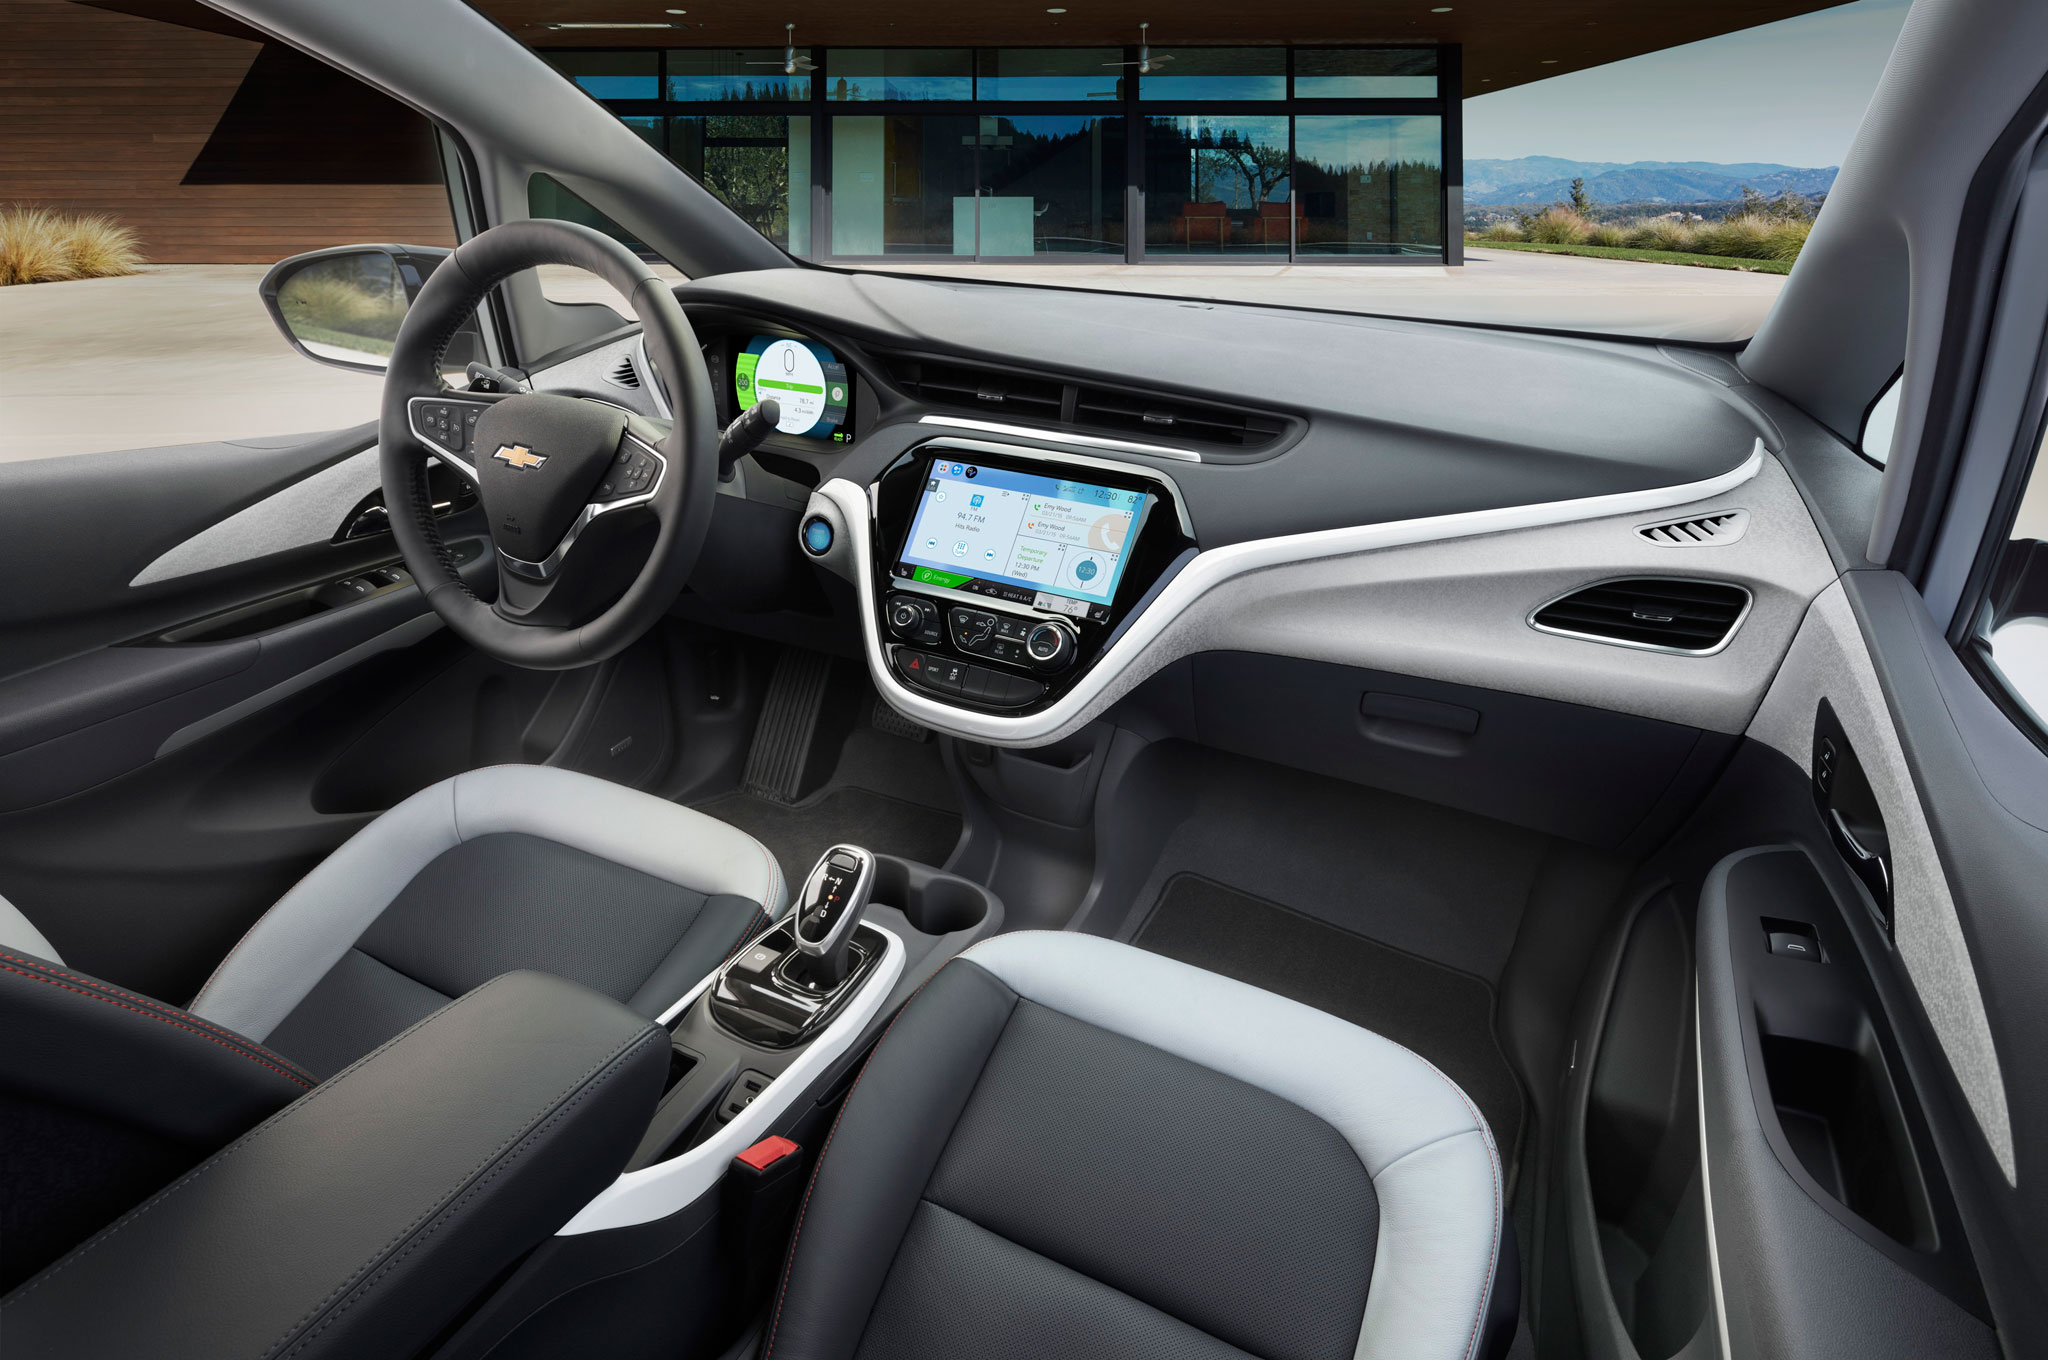 Meet the Chevrolet Bolt, the First Electric Car for the Masses